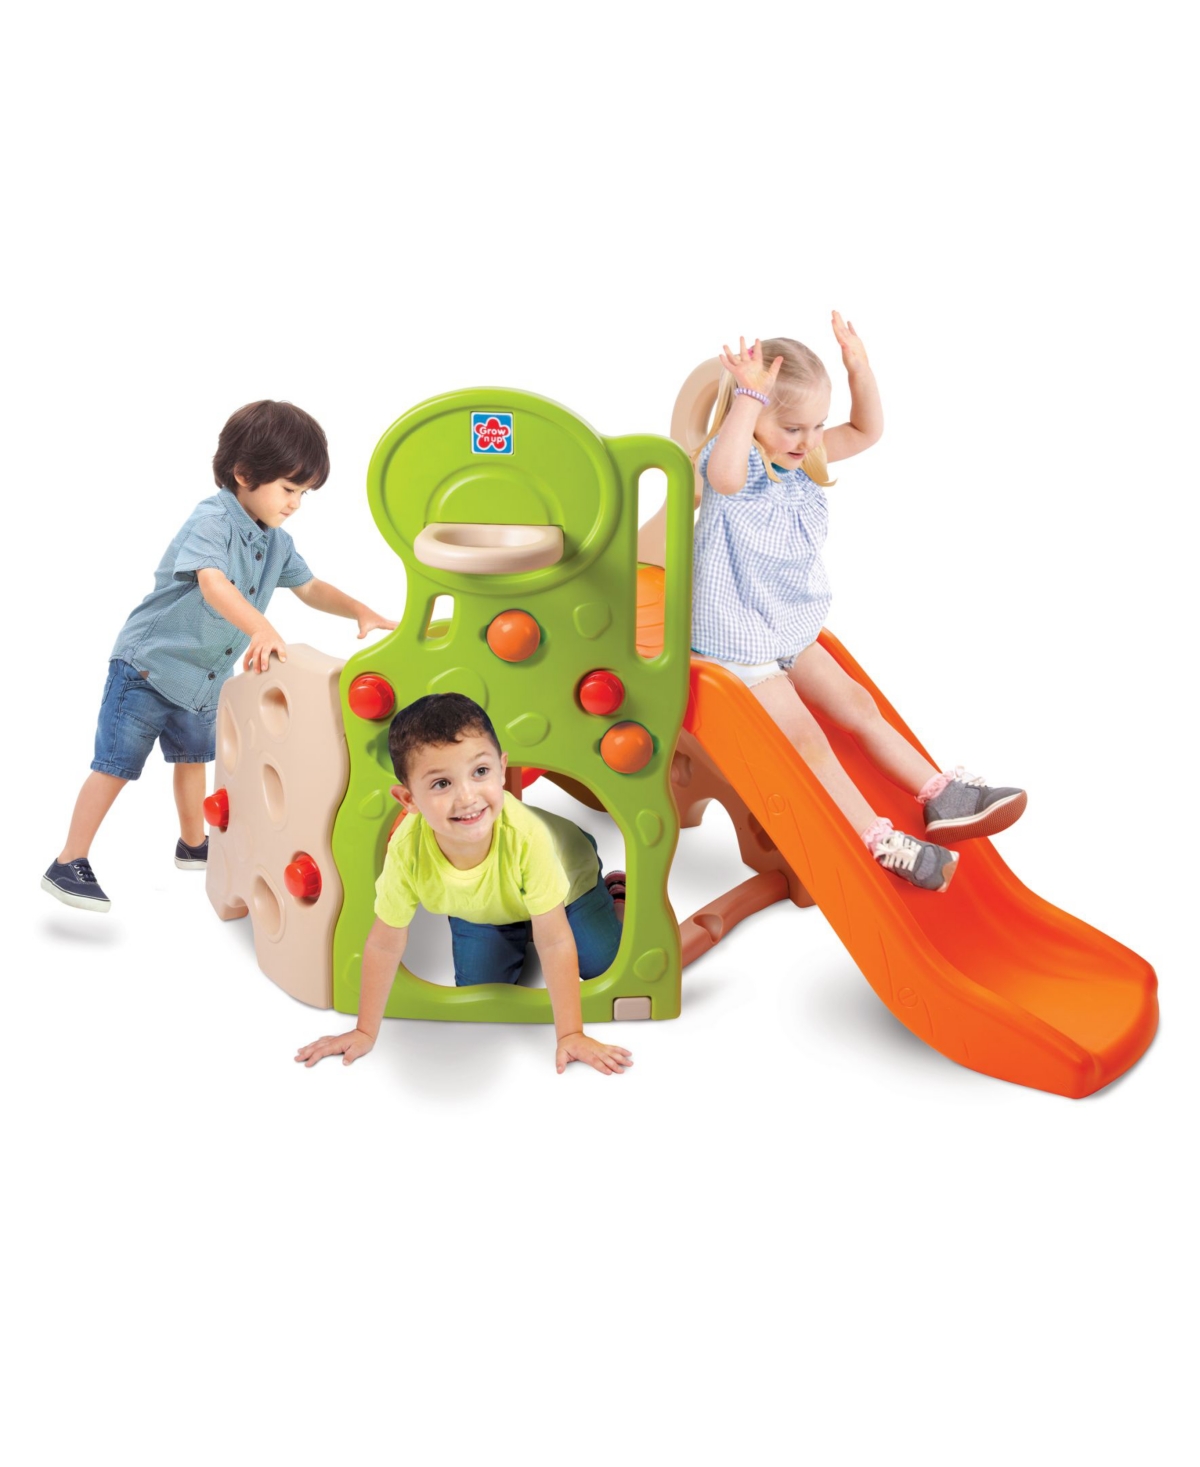 Grow 'n Up Kids' Lil' Adventurers Climber And Slide In Multi